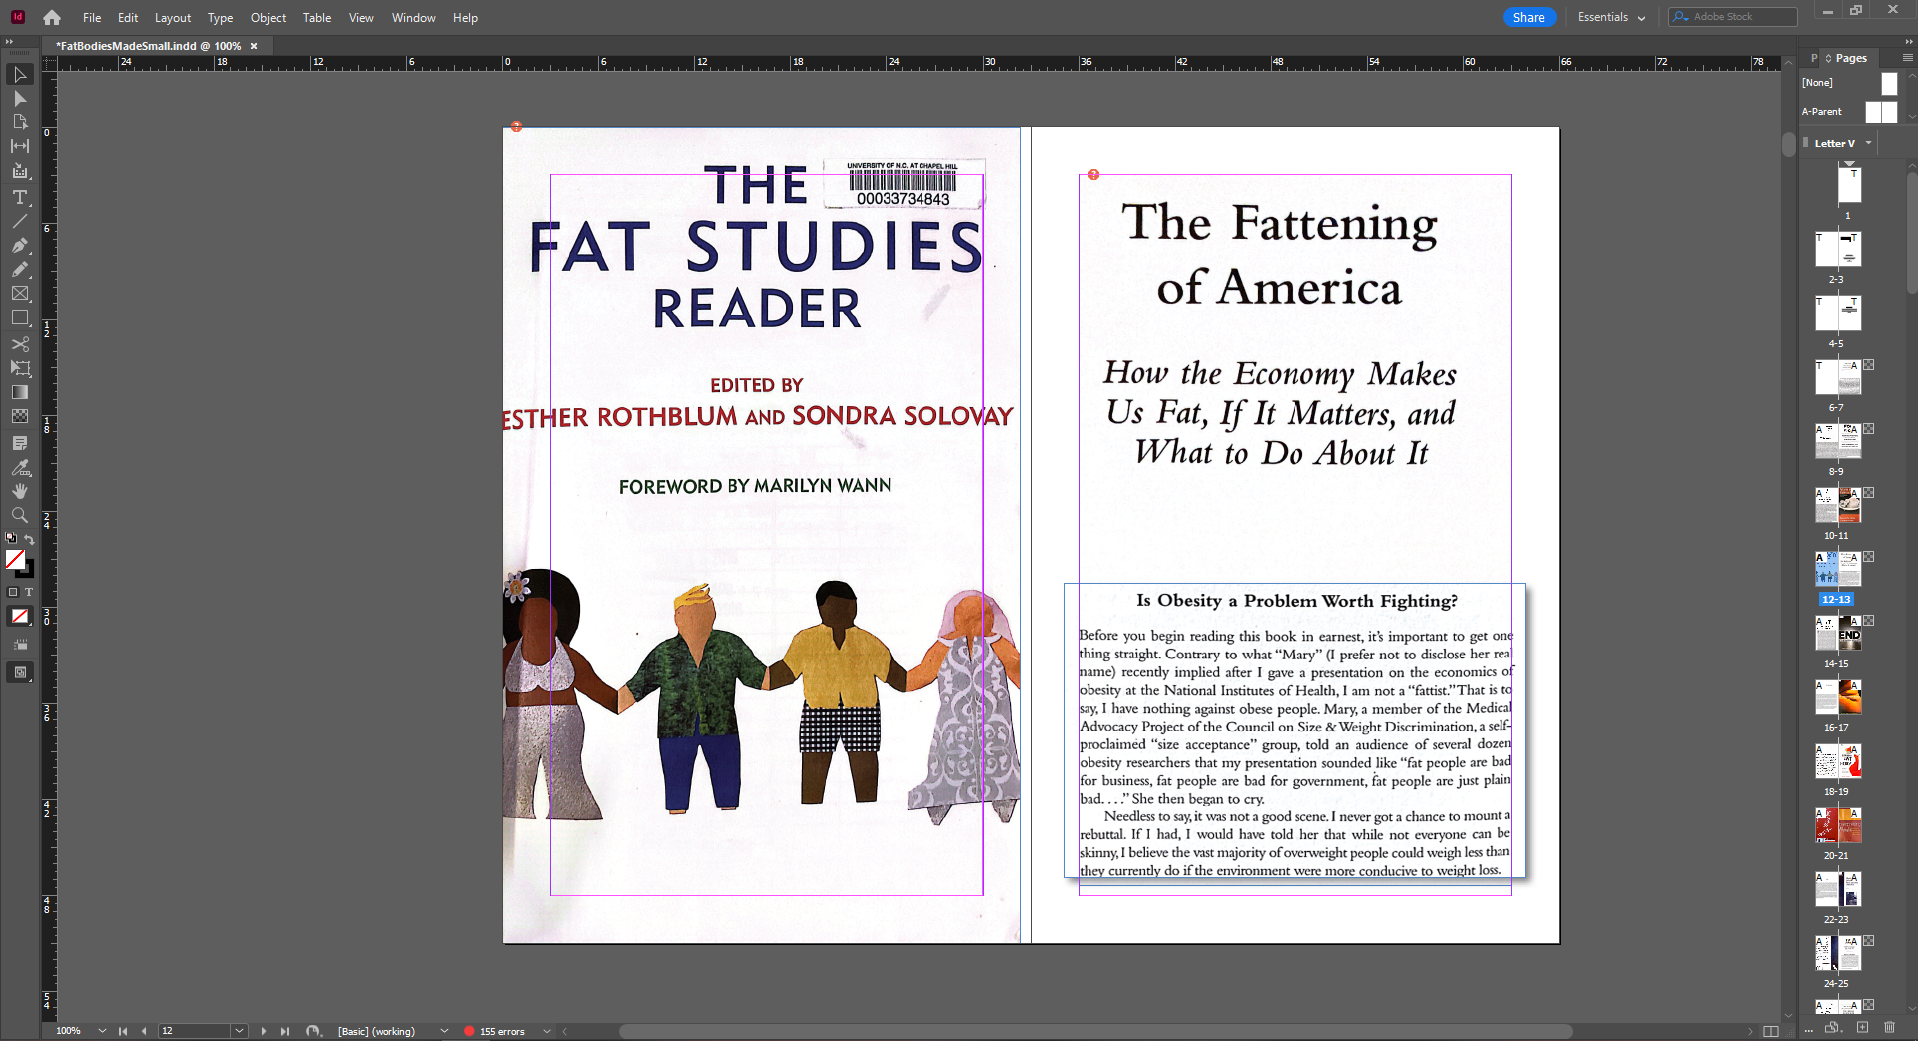 Two of the pages from the InDesign file for the book. Left page: The Fat Studies Reader, right page: The Fattening of America.